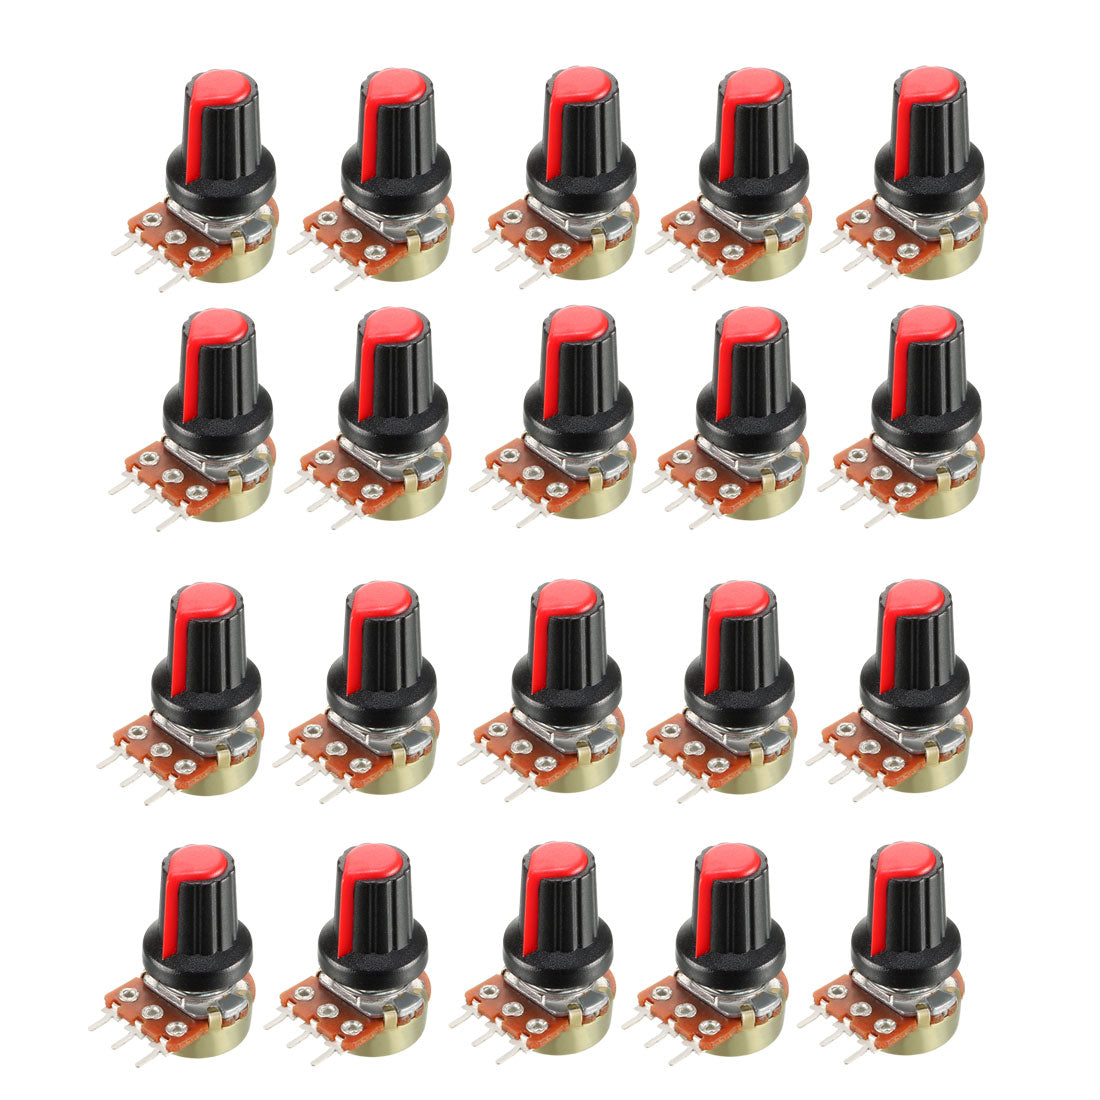 uxcell Uxcell 20Pcs 10K Ohm Variable Resistors Single Turn Rotary Carbon Film Taper Potentiometer with Knobs